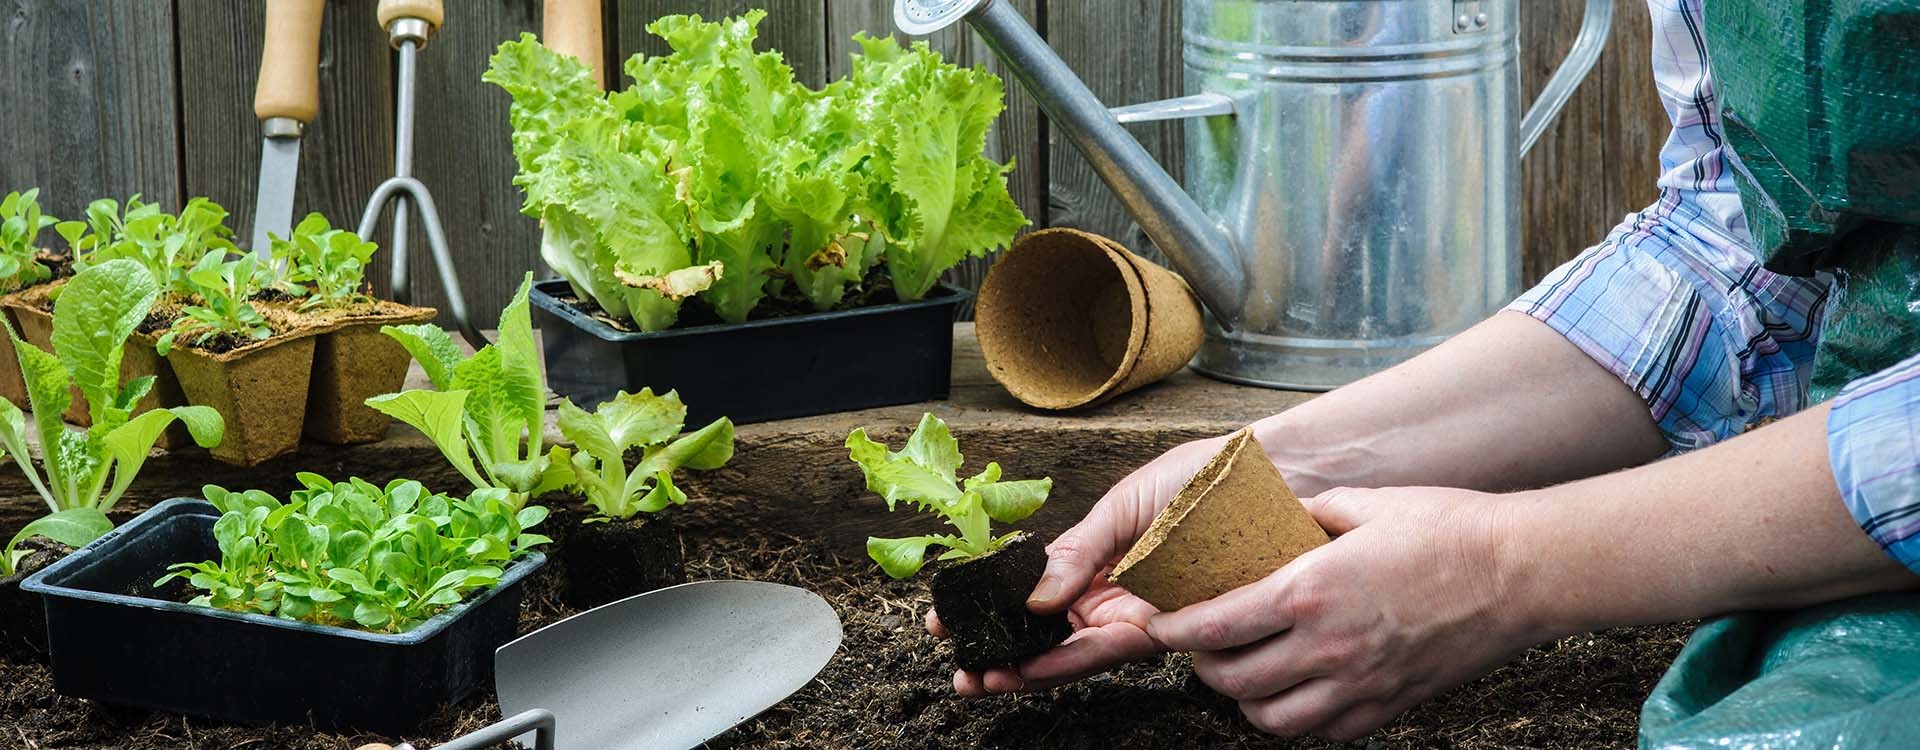 A 5-Step Guide to Growing a Home Vegetable Garden